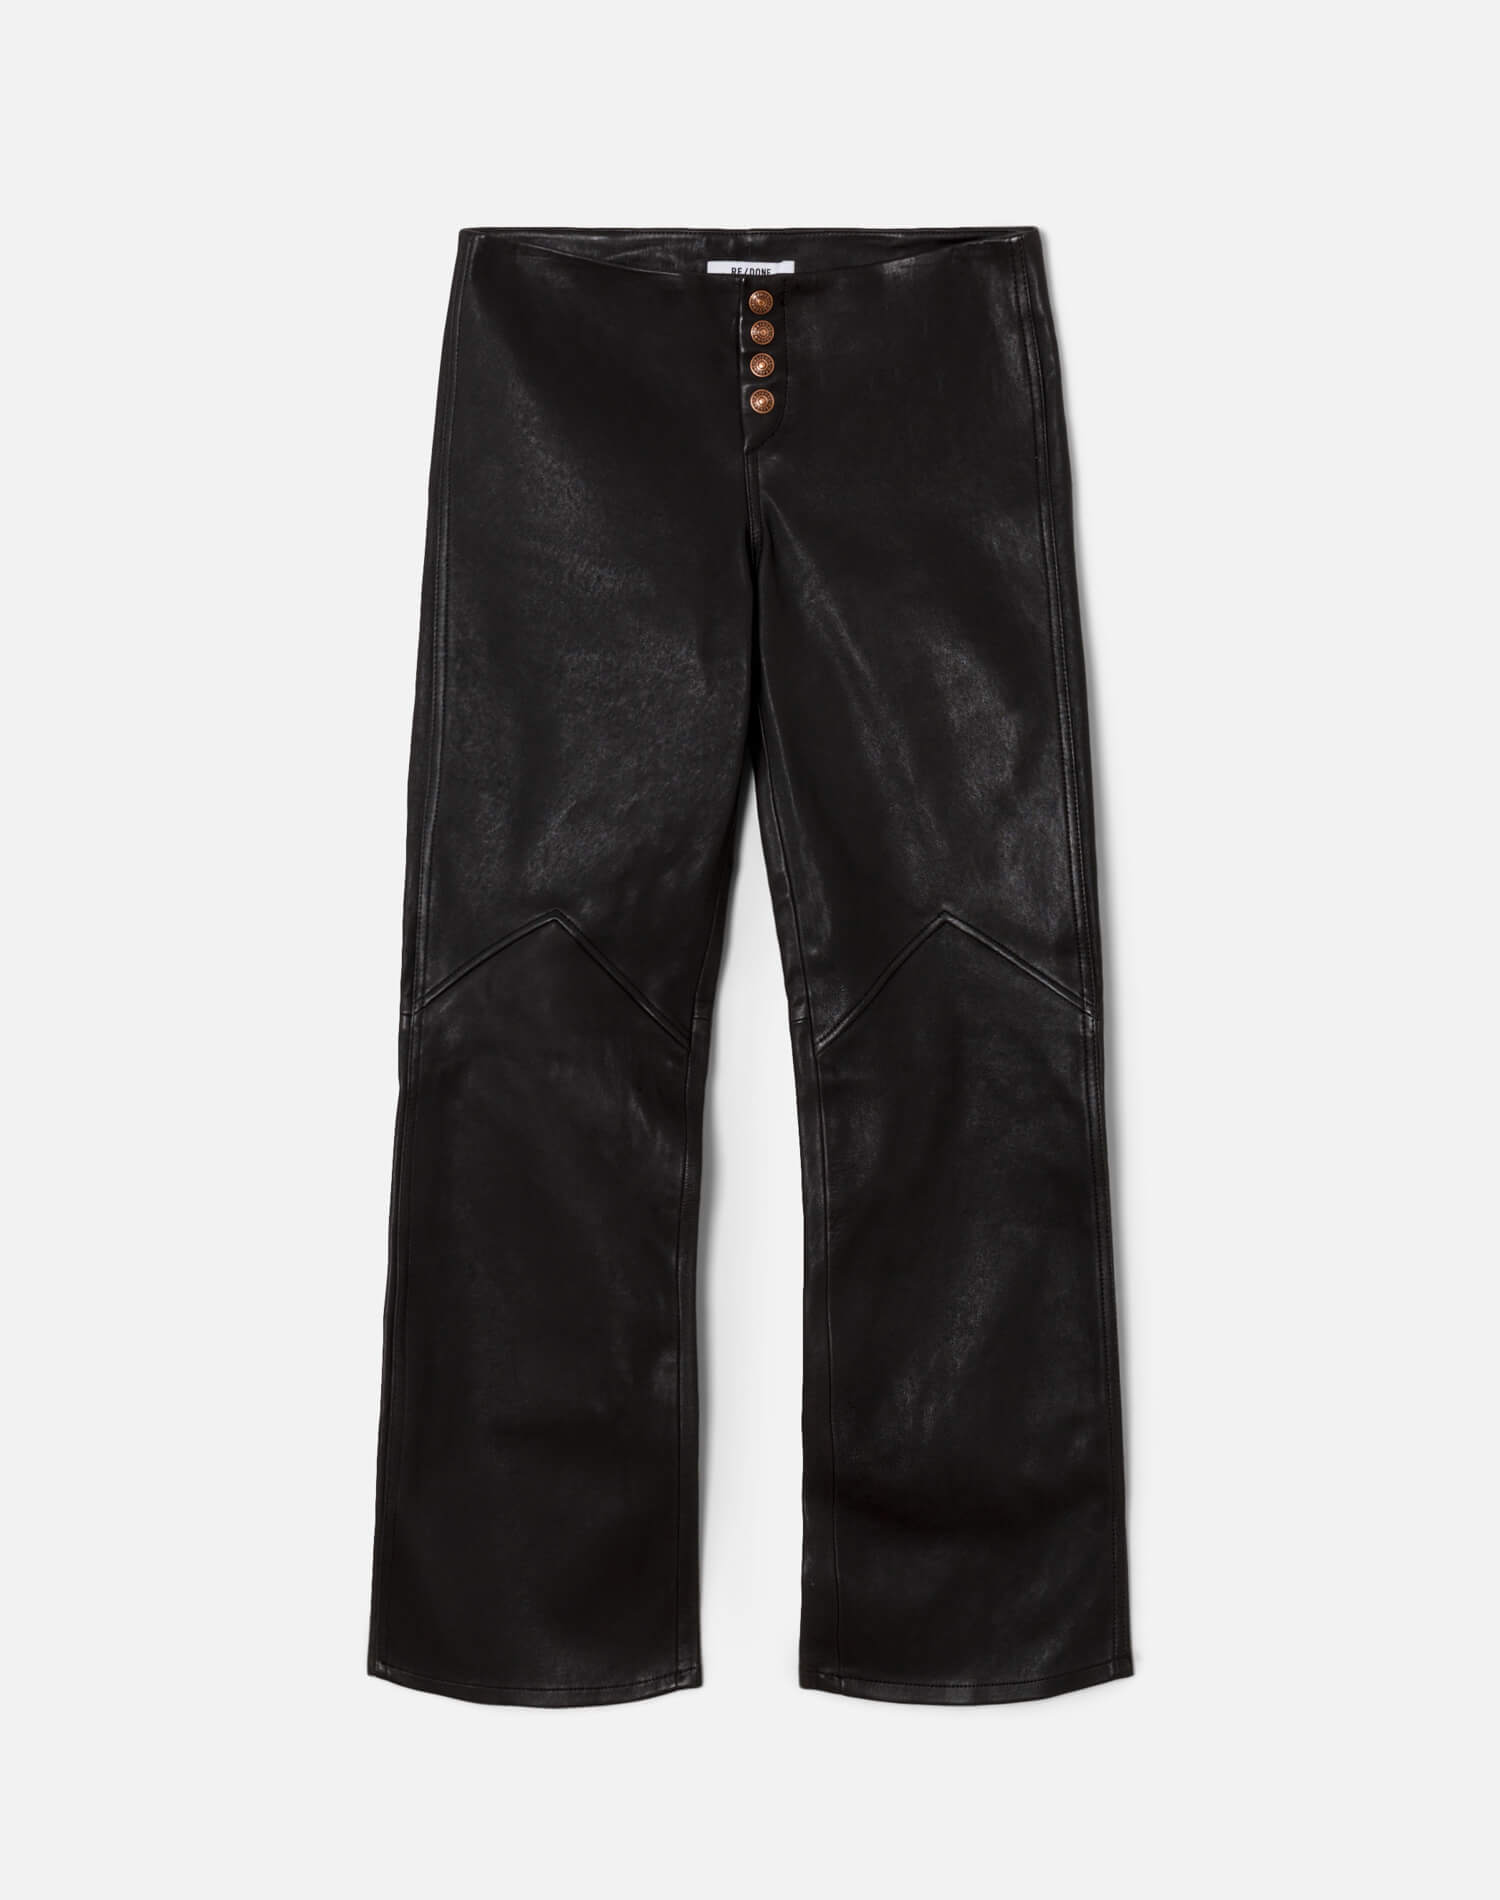 Leather Snap Front Crop Boot Pant - Black Leather